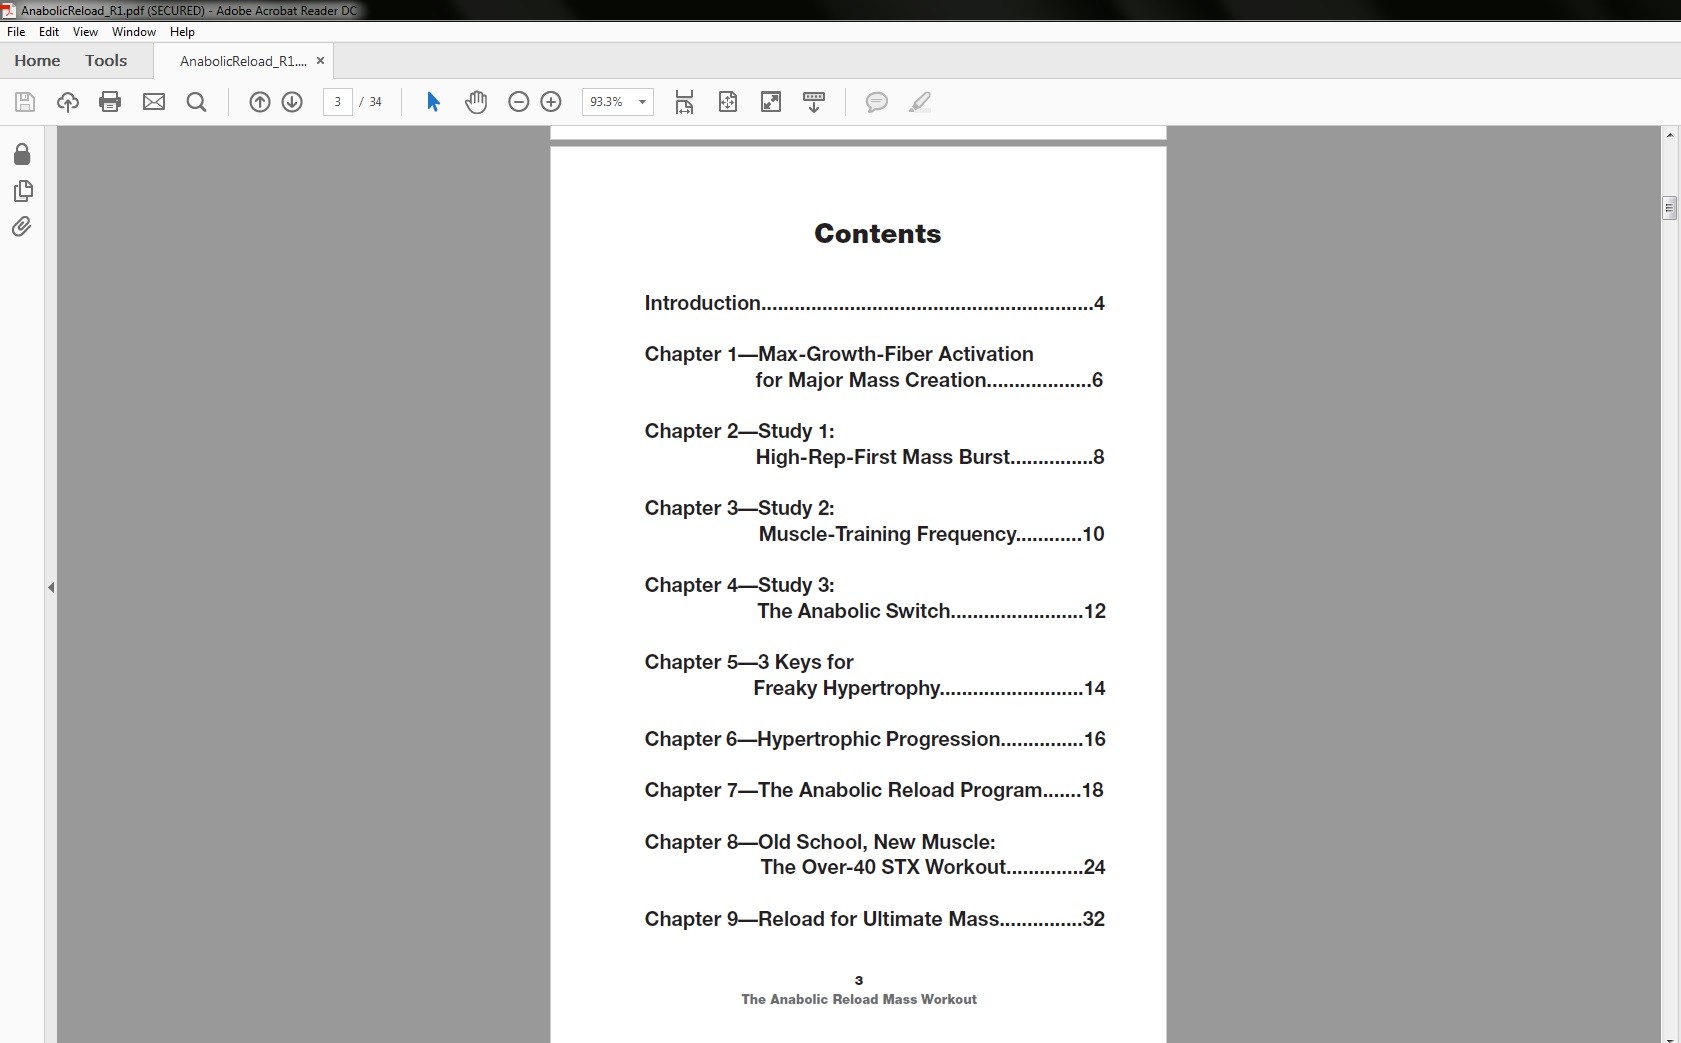 Anabolic Reload's Table of Contents